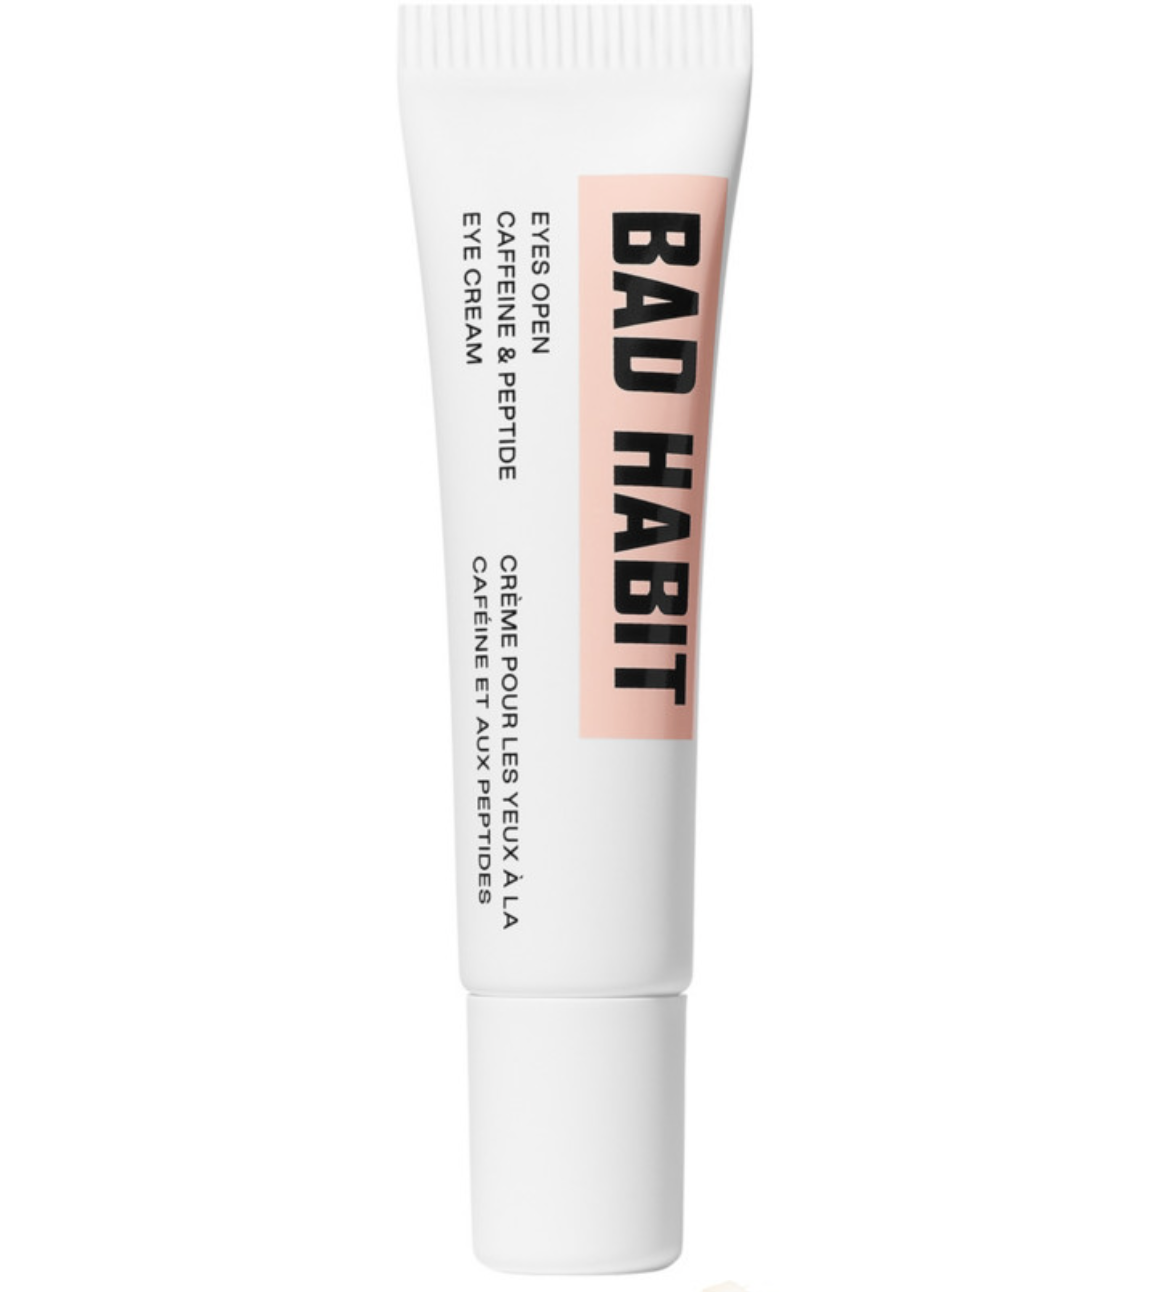 White and pink bottle of eye cream that says &quot;Bad Habit&quot;